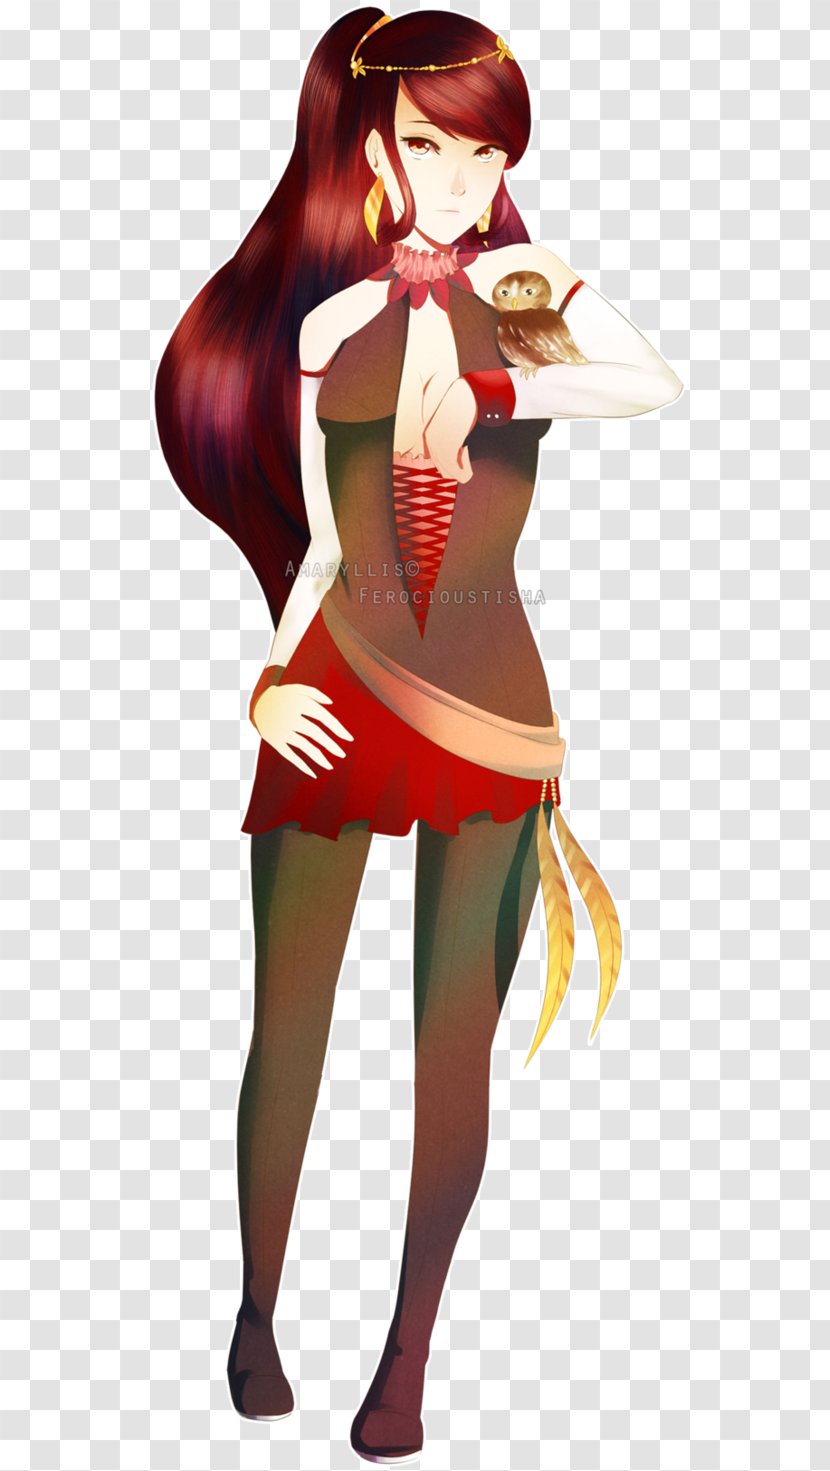 Character Cartoon Fan Fiction Here In Your Game - Heart - Amaryllis Transparent PNG